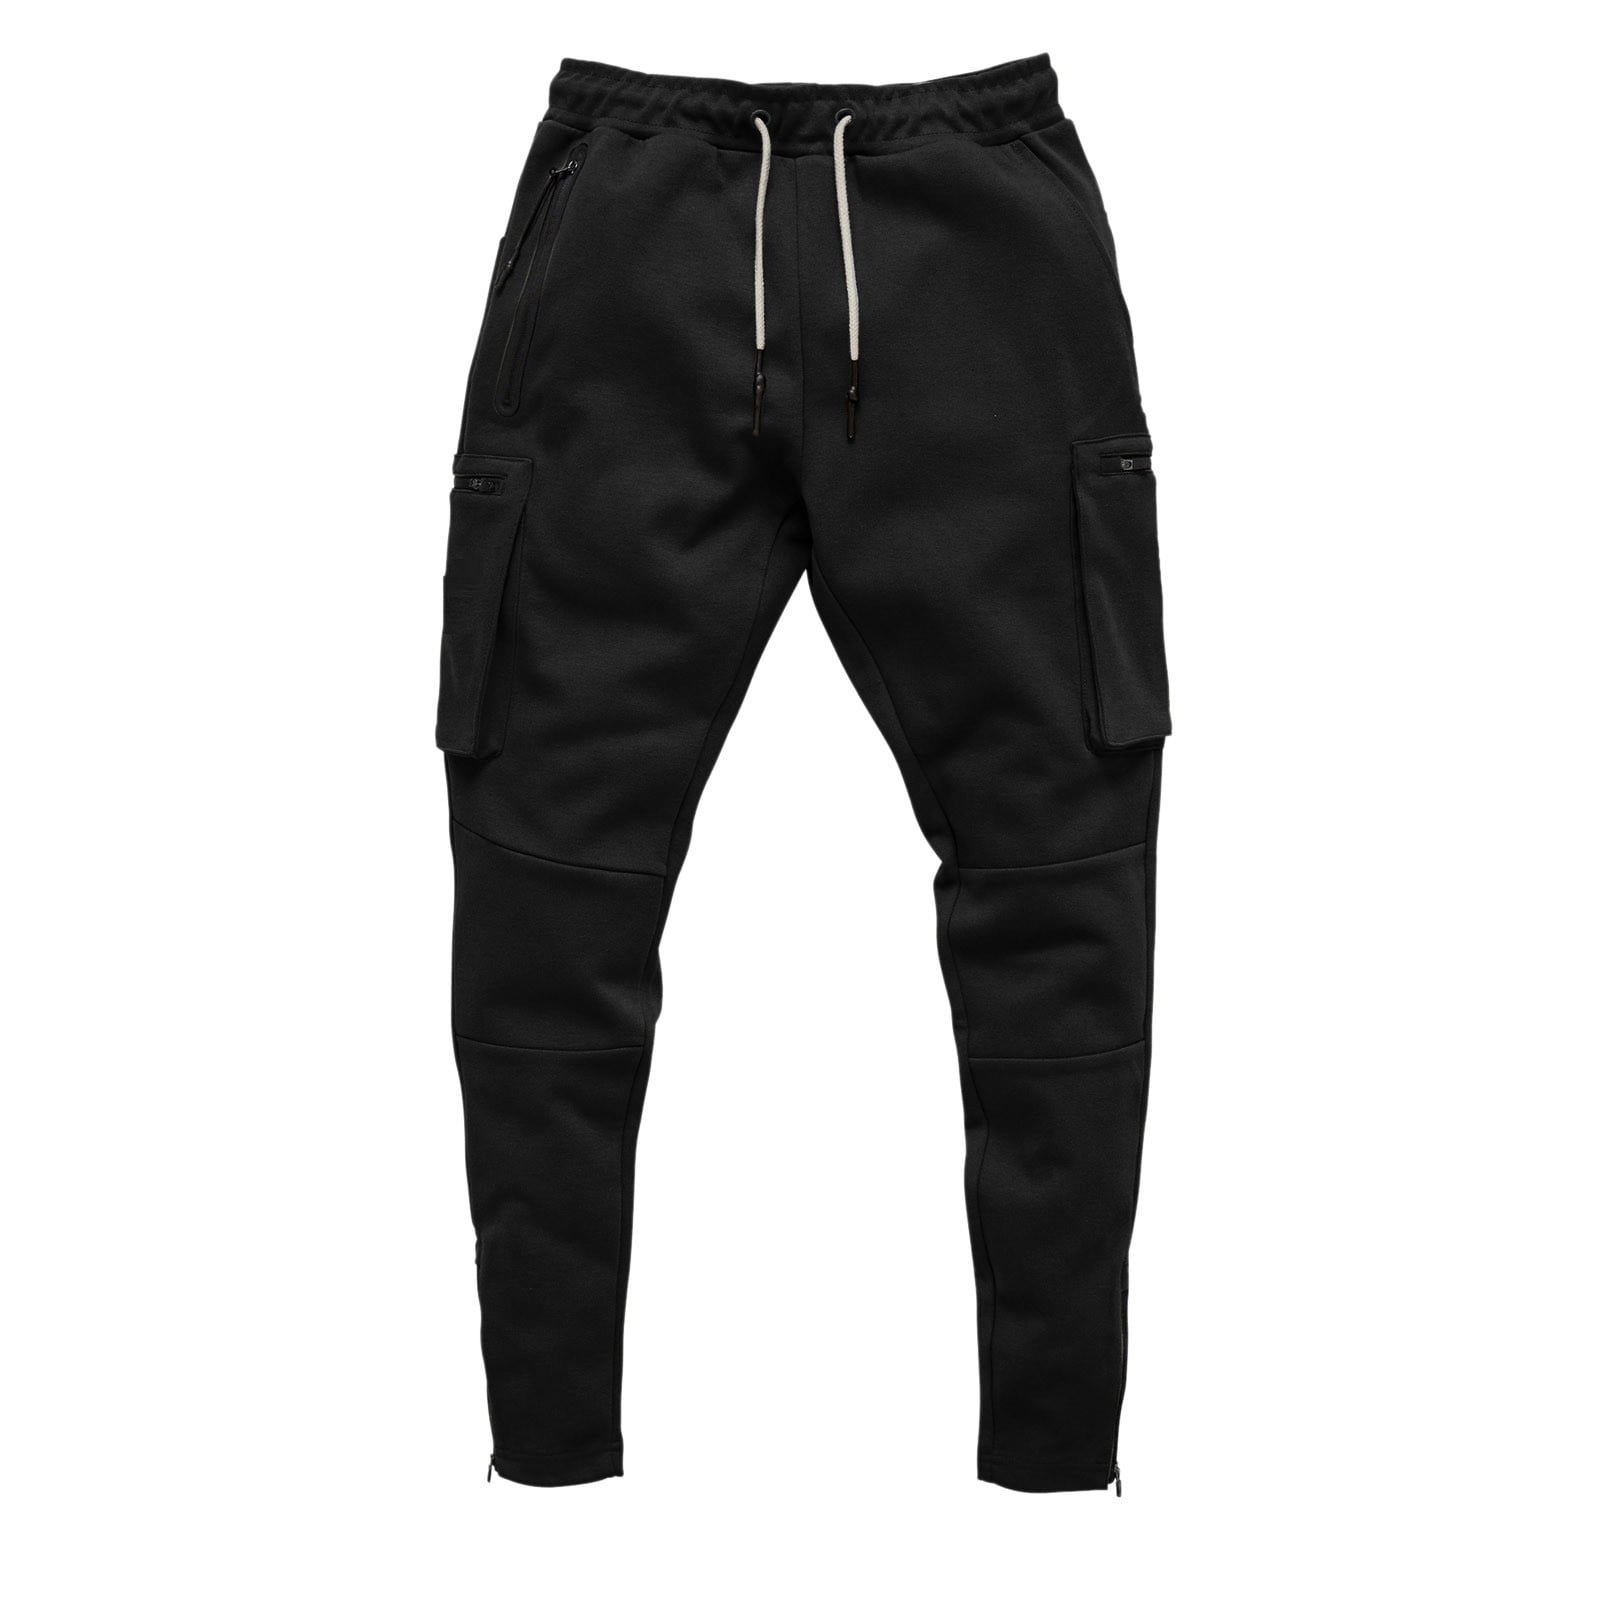 LEEy-World Work Pants for Men Joggers for Men Hiking Pants Quick